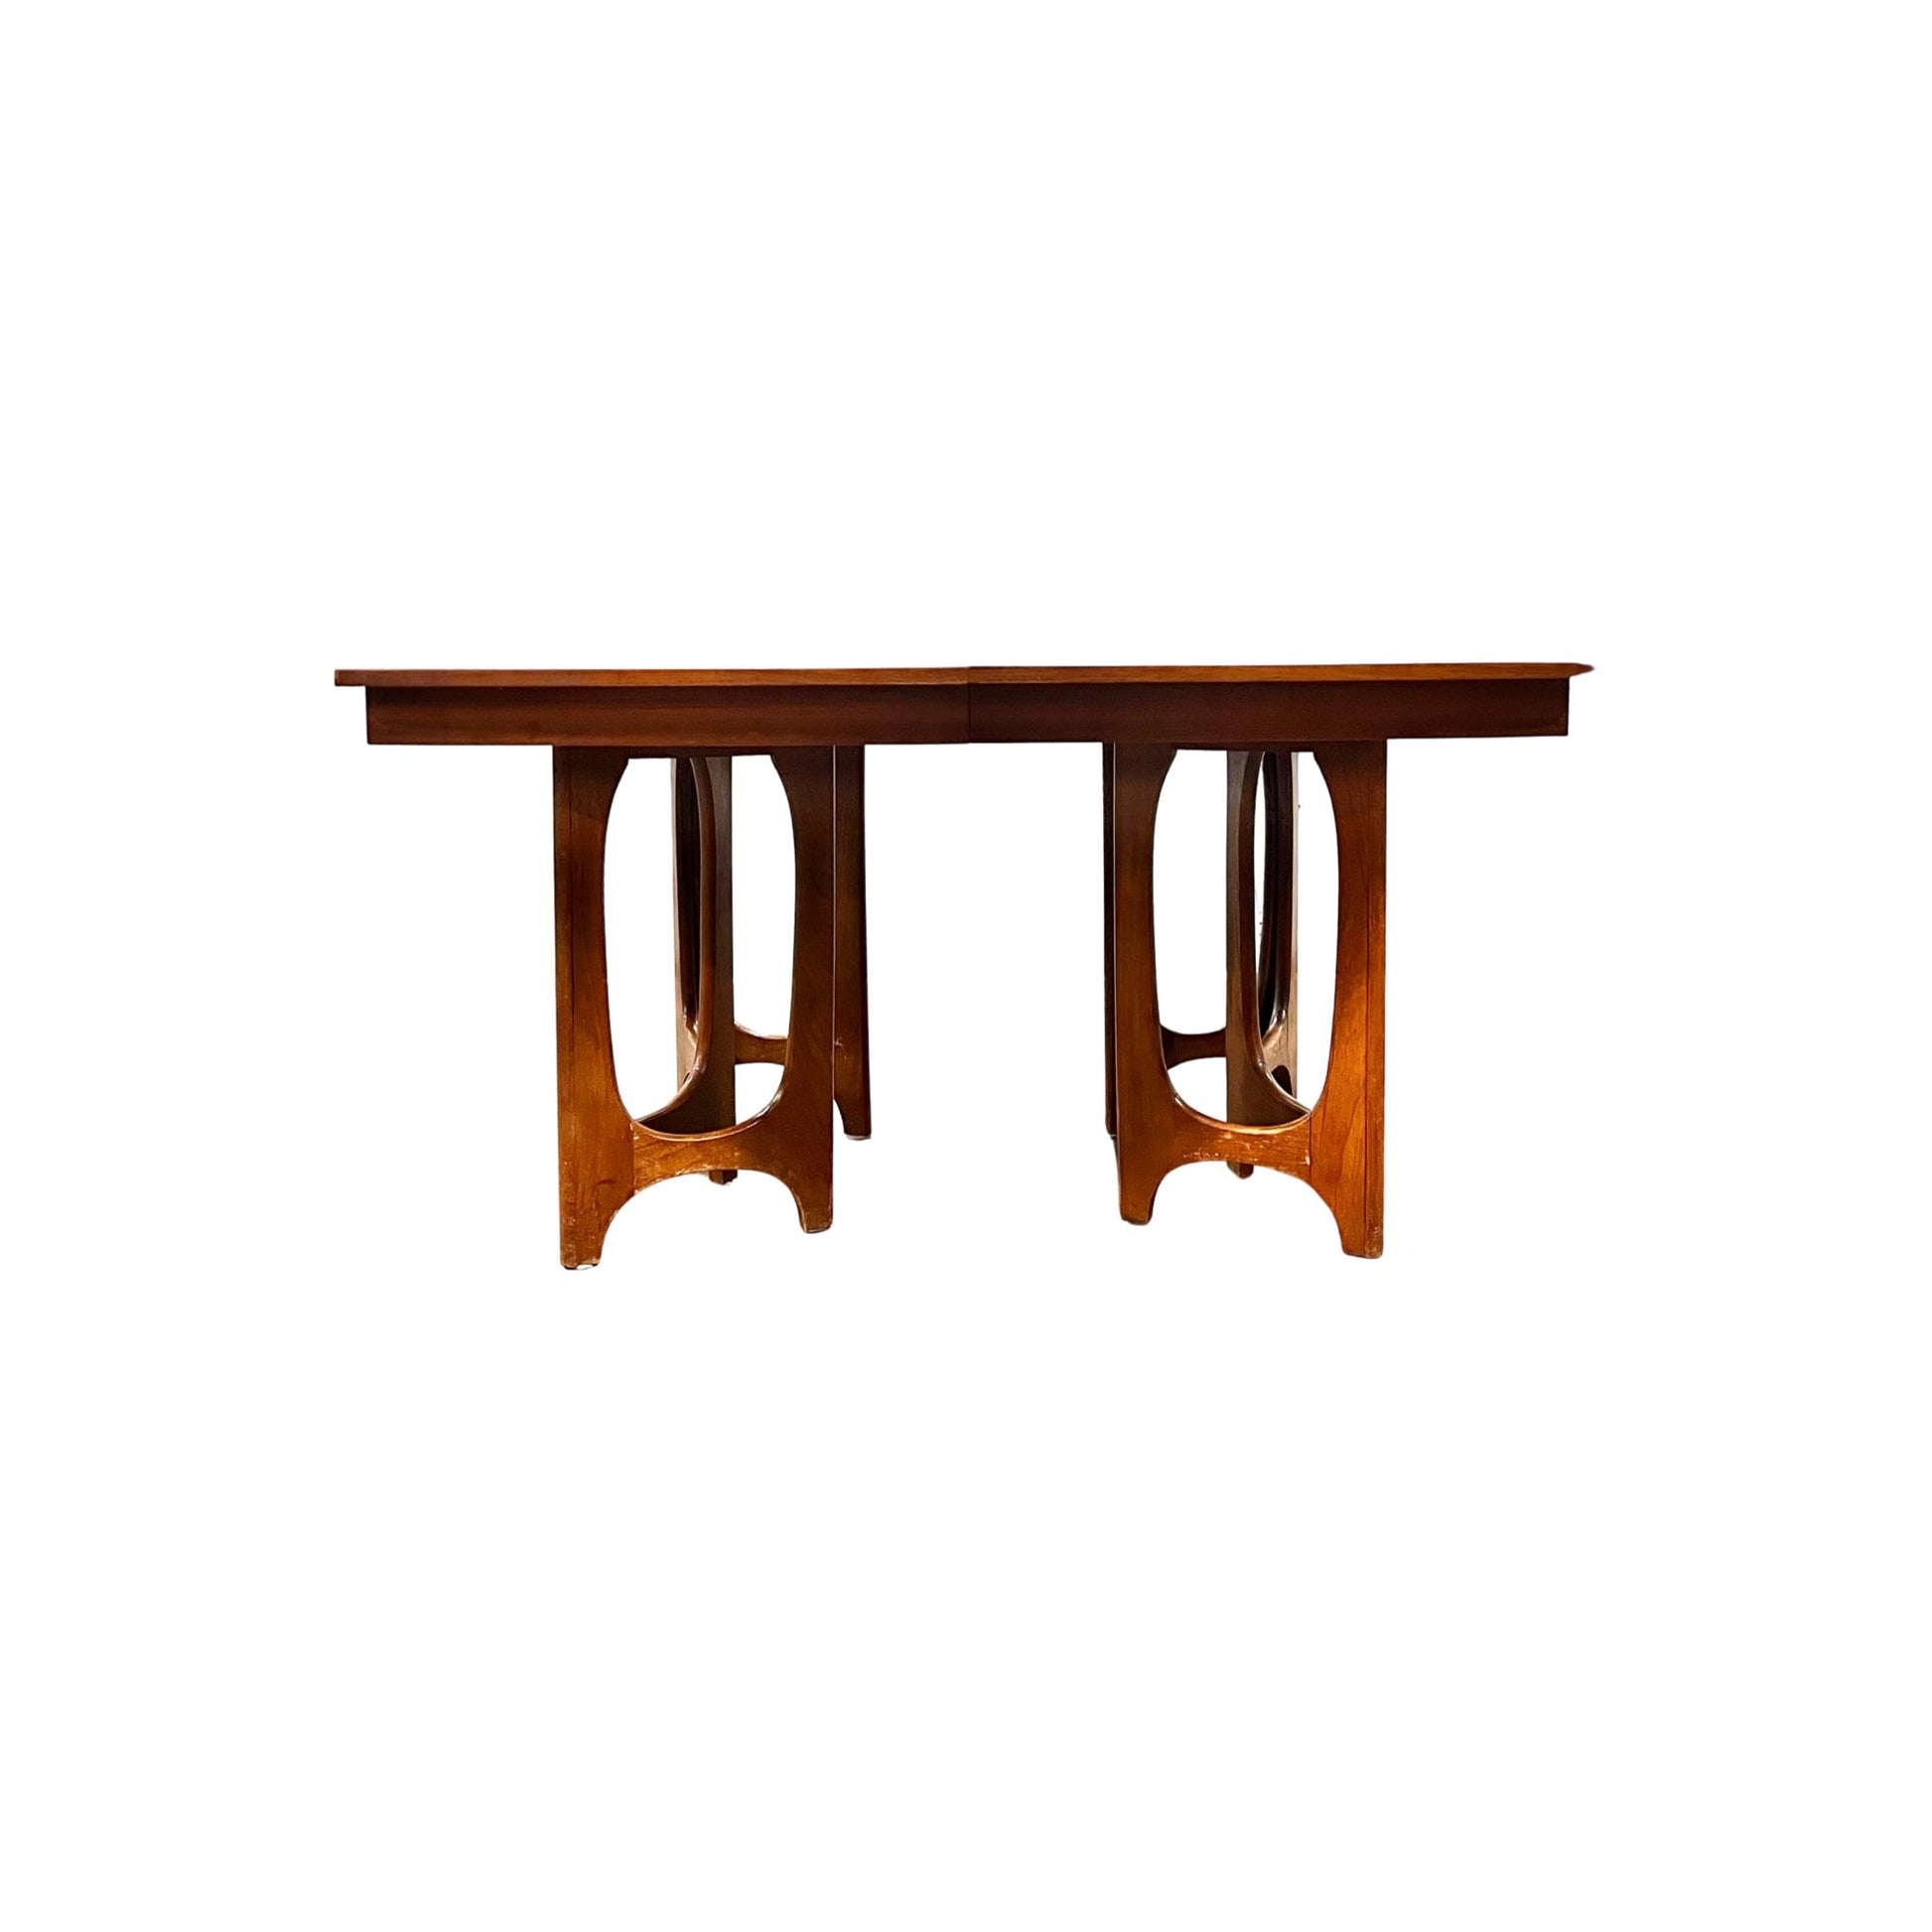 Timeless Mid-Century Modern Elegance from the 1960s - Pedestal Dining Table by Young Manufacturing